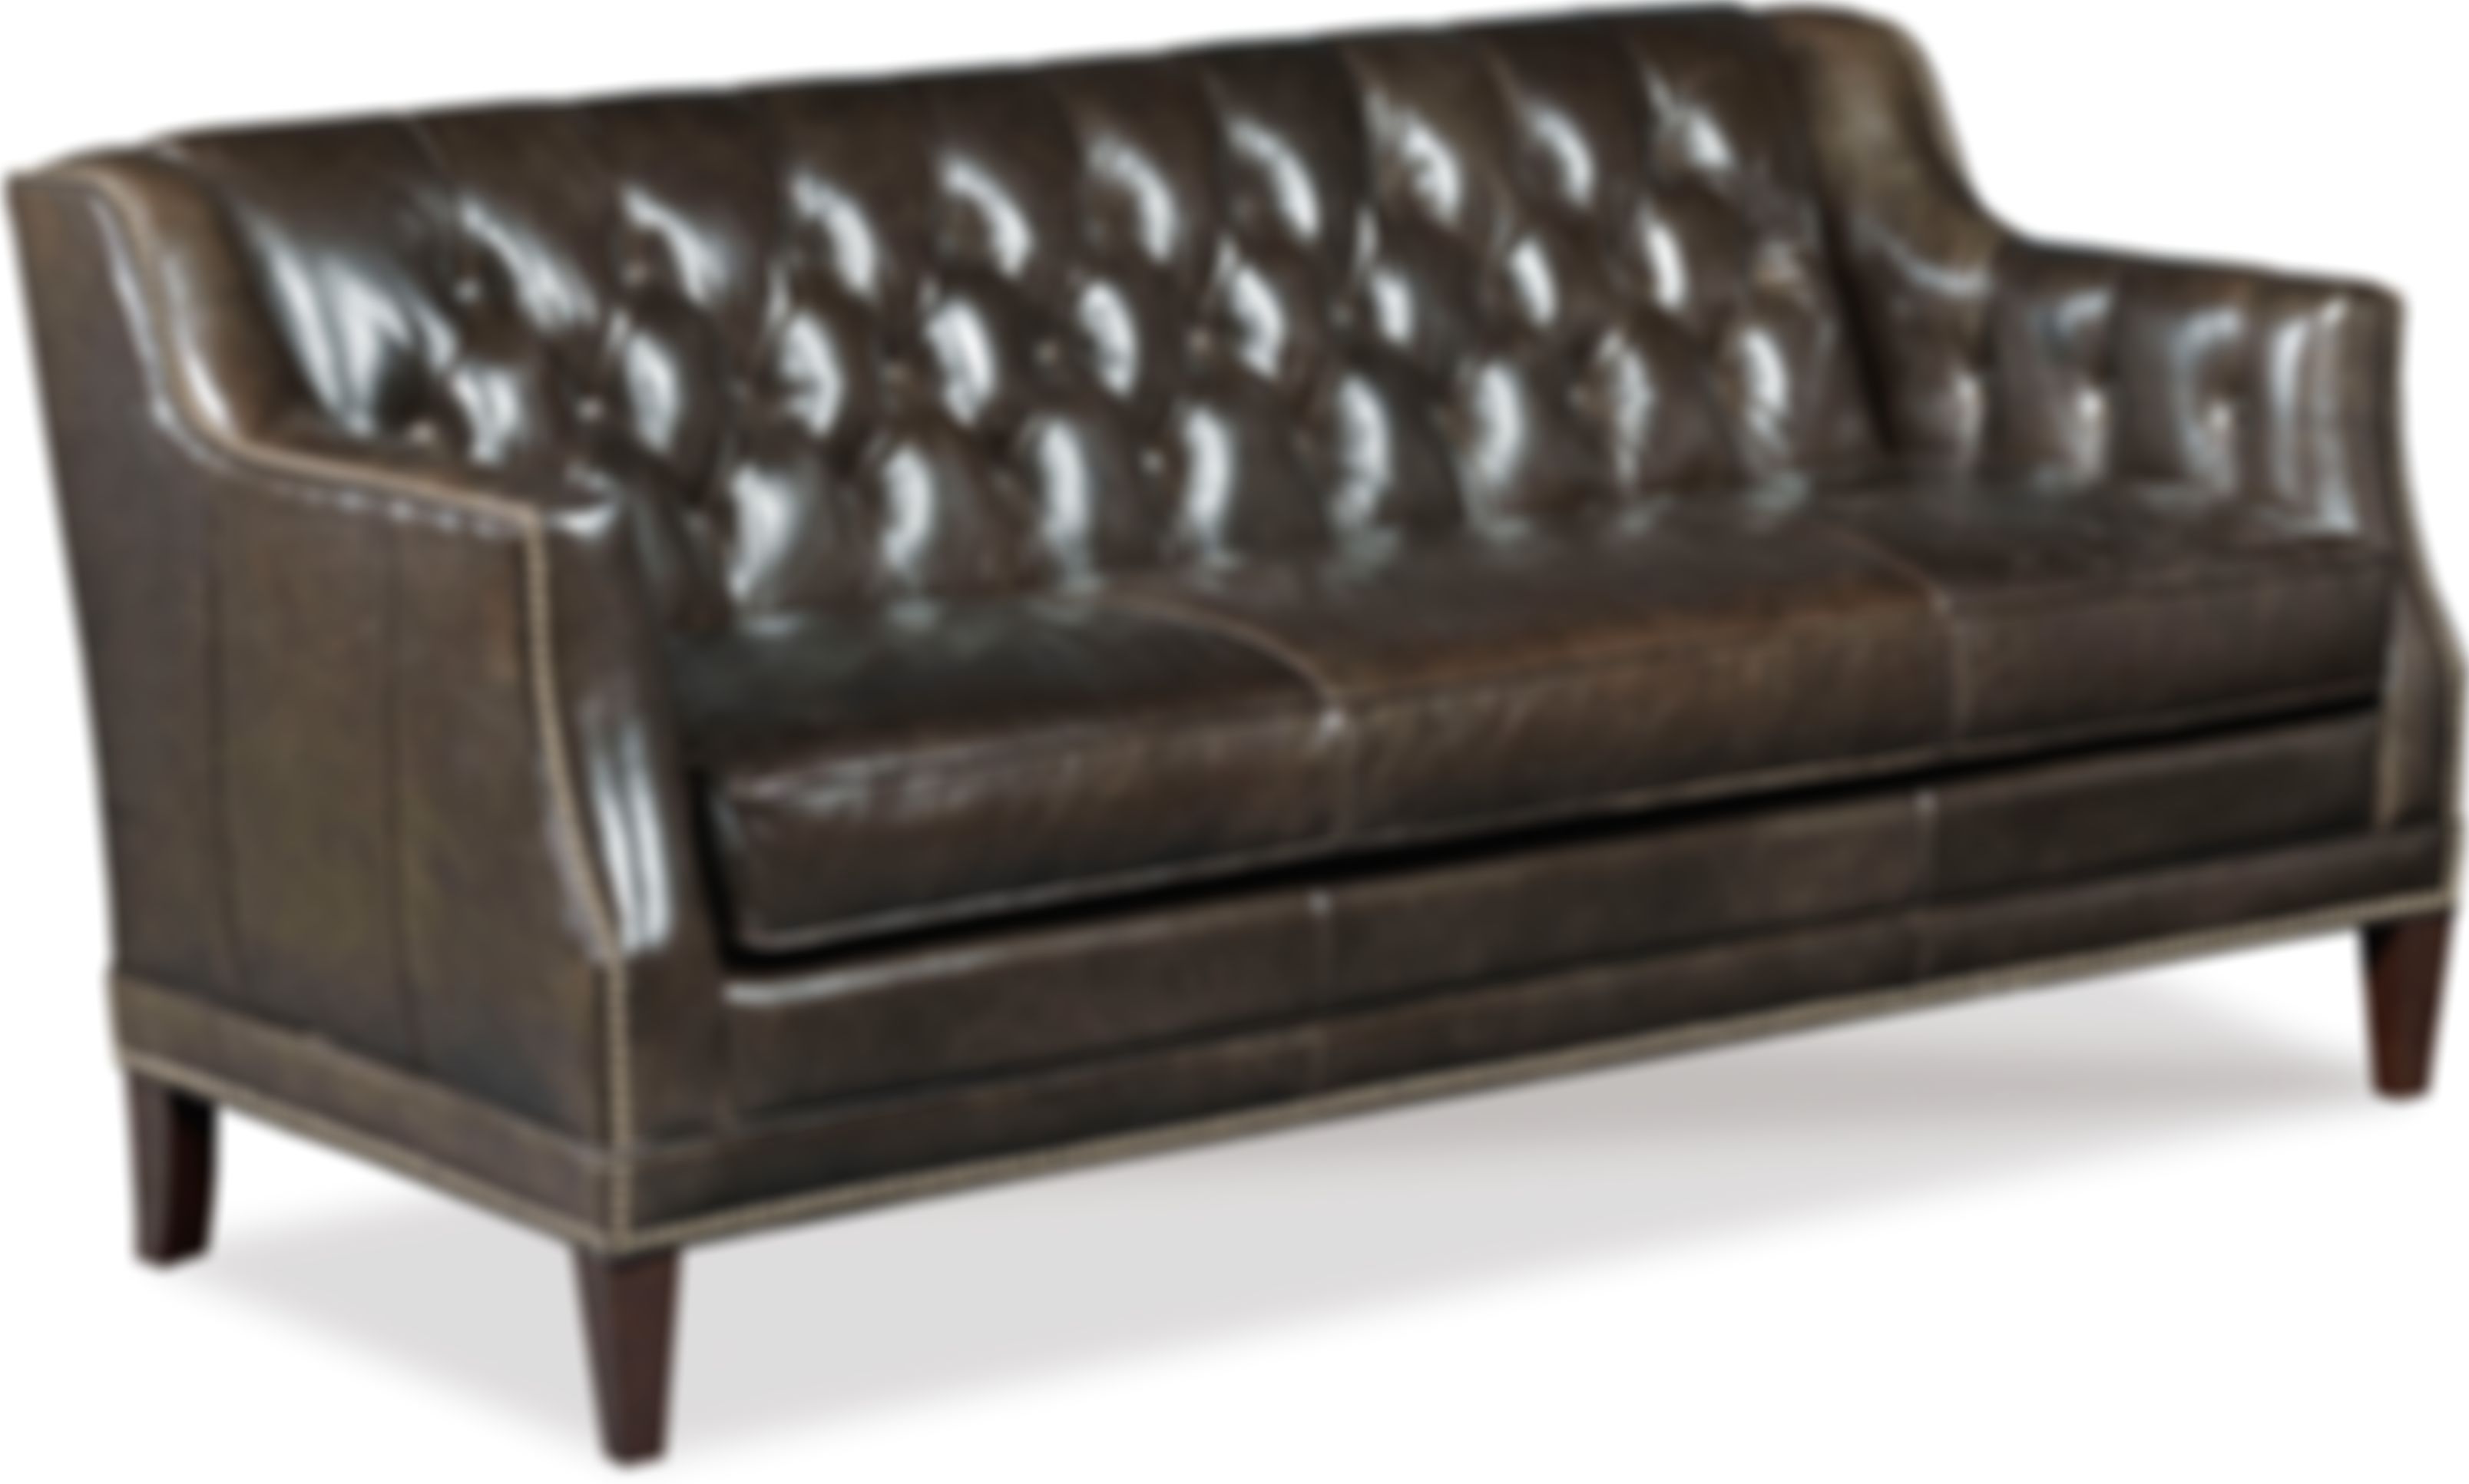 Austin Leather Sofa Sofas And Sectionals, Leather Couches Austin